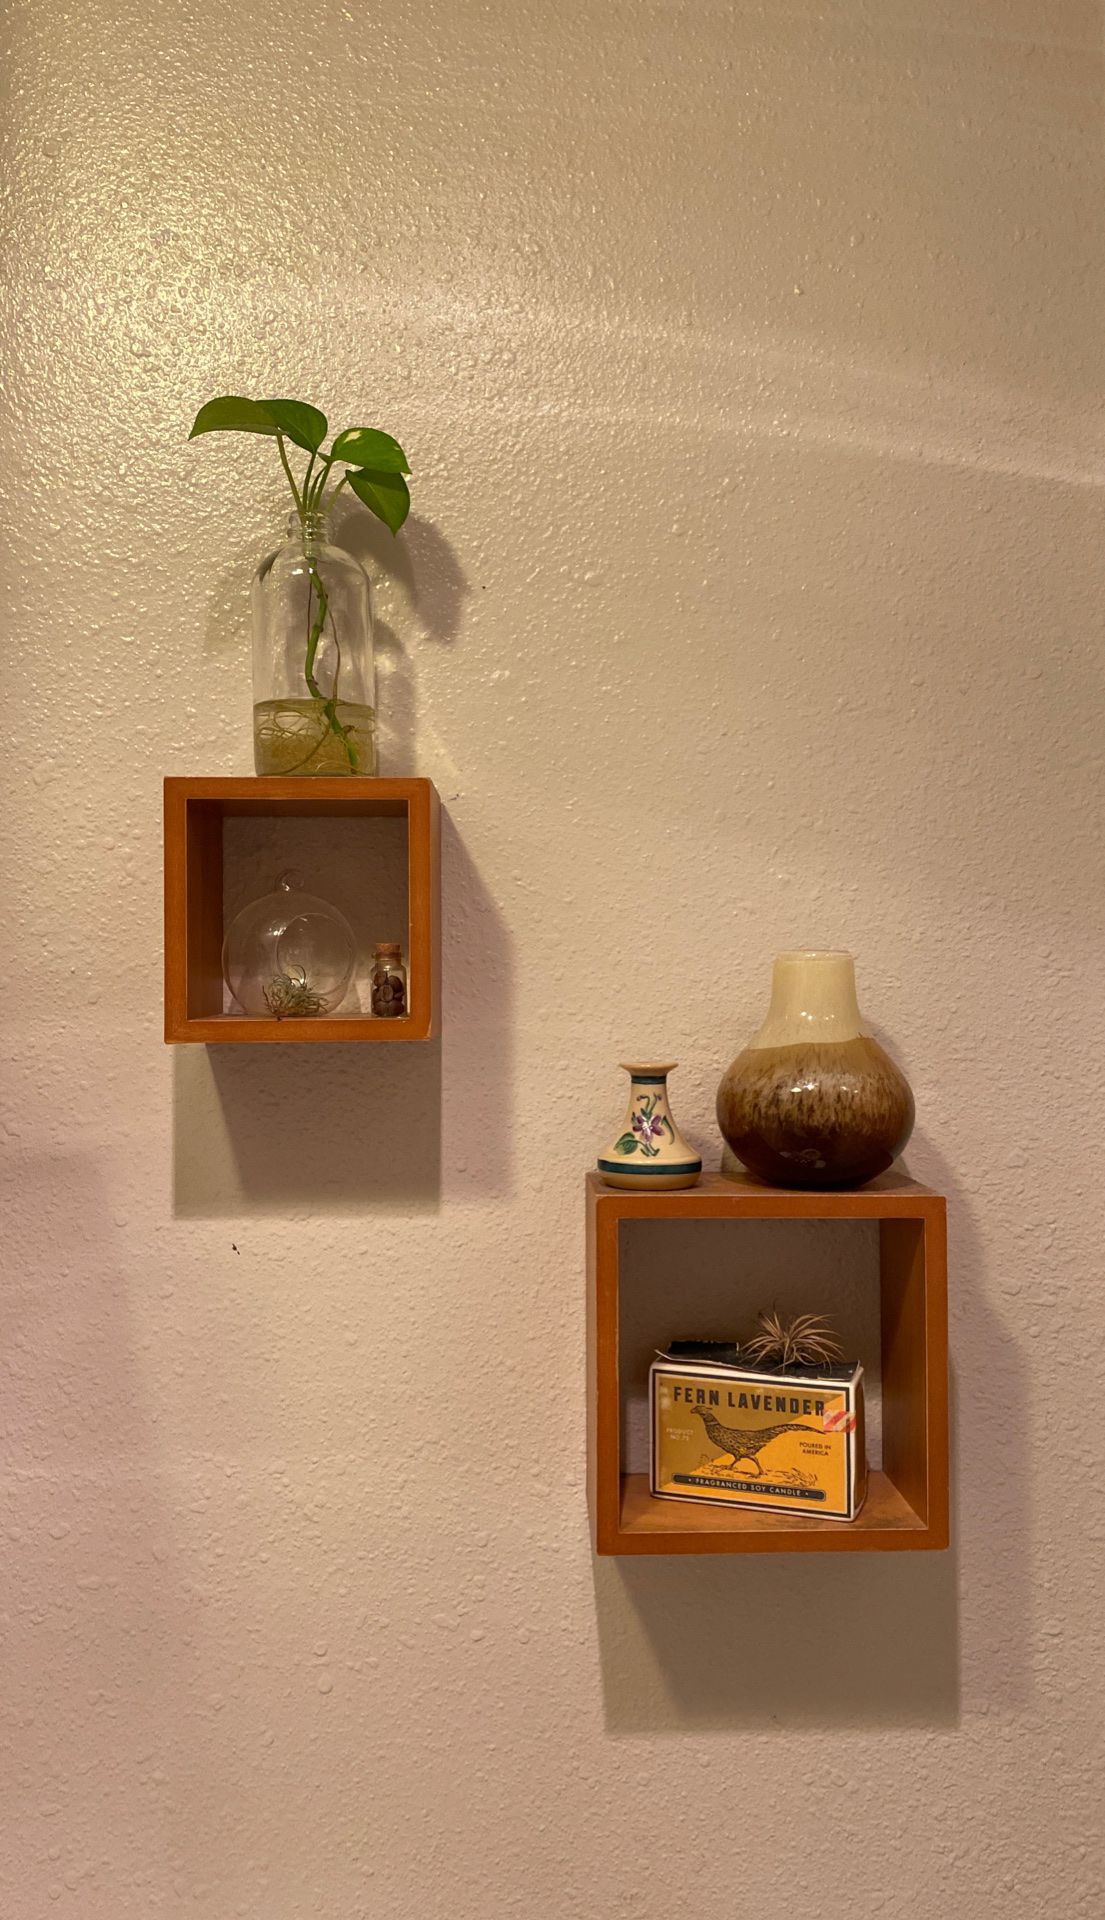 Small wall shelves both for $12